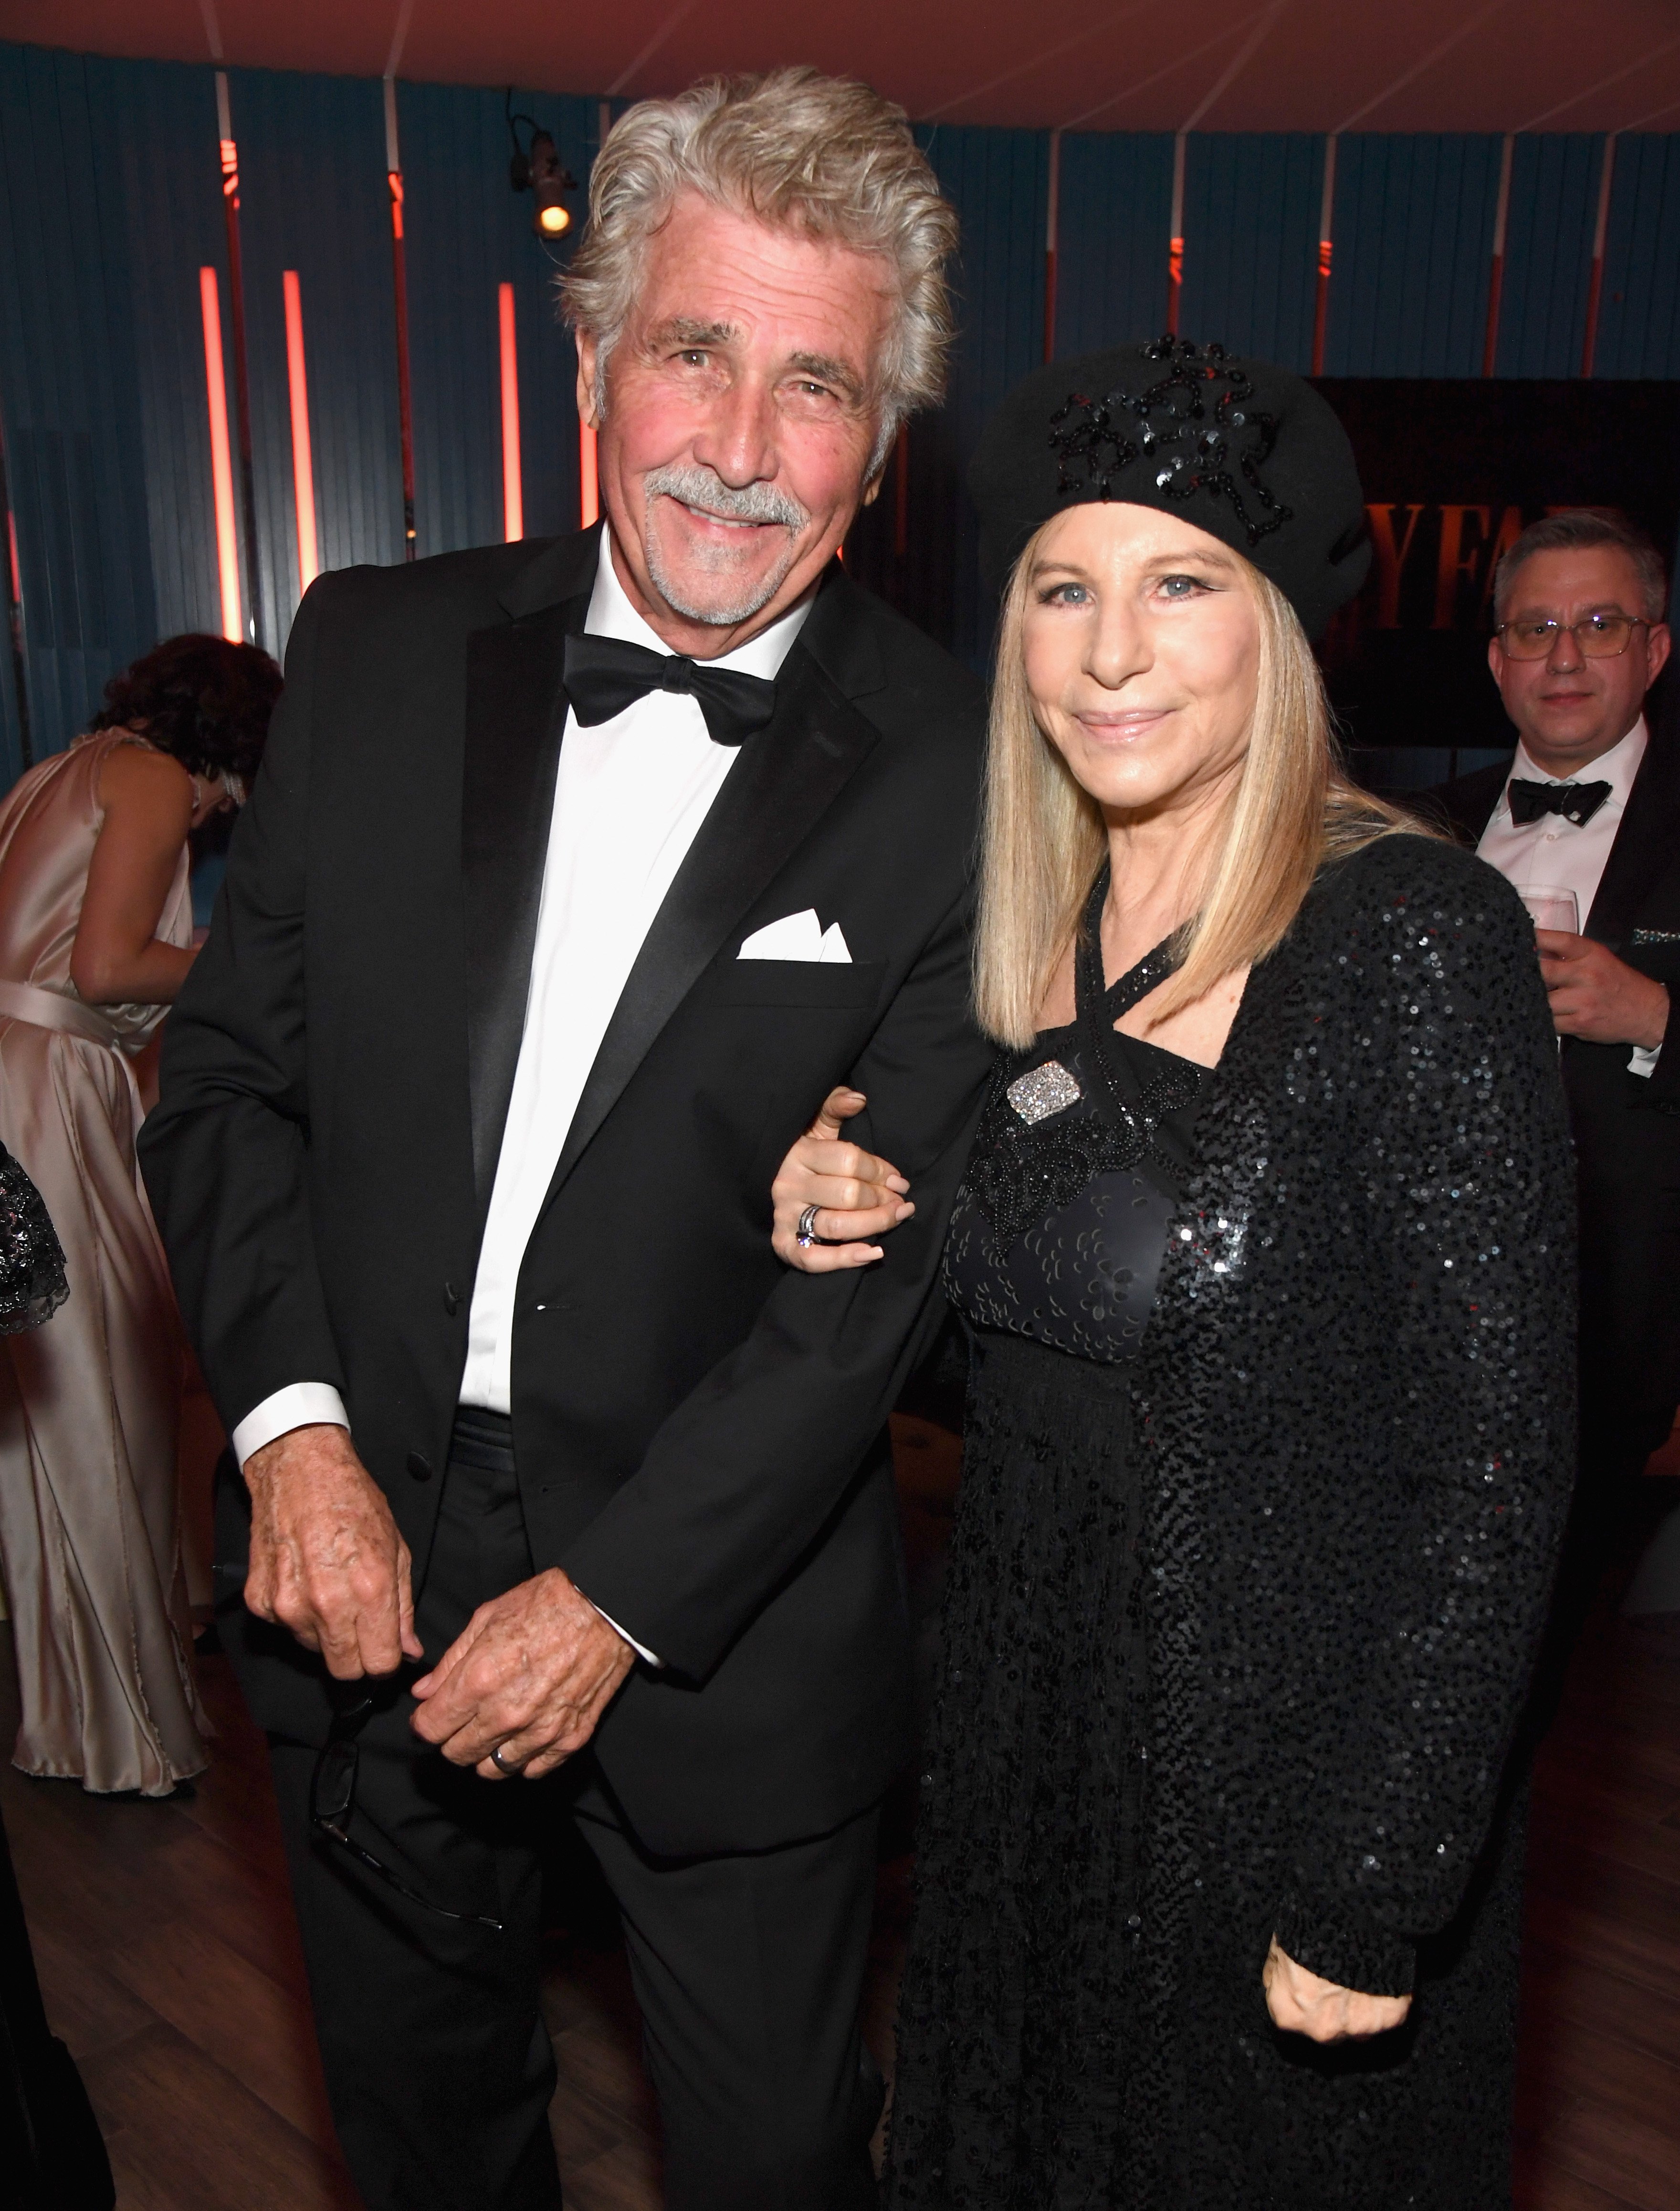 James Brolin and Barbra Streisand attend the 2019 Vanity Fair Oscar Party at Wallis Annenberg Center on February 24, 2019 in Beverly Hills, California | Photo: Getty Images